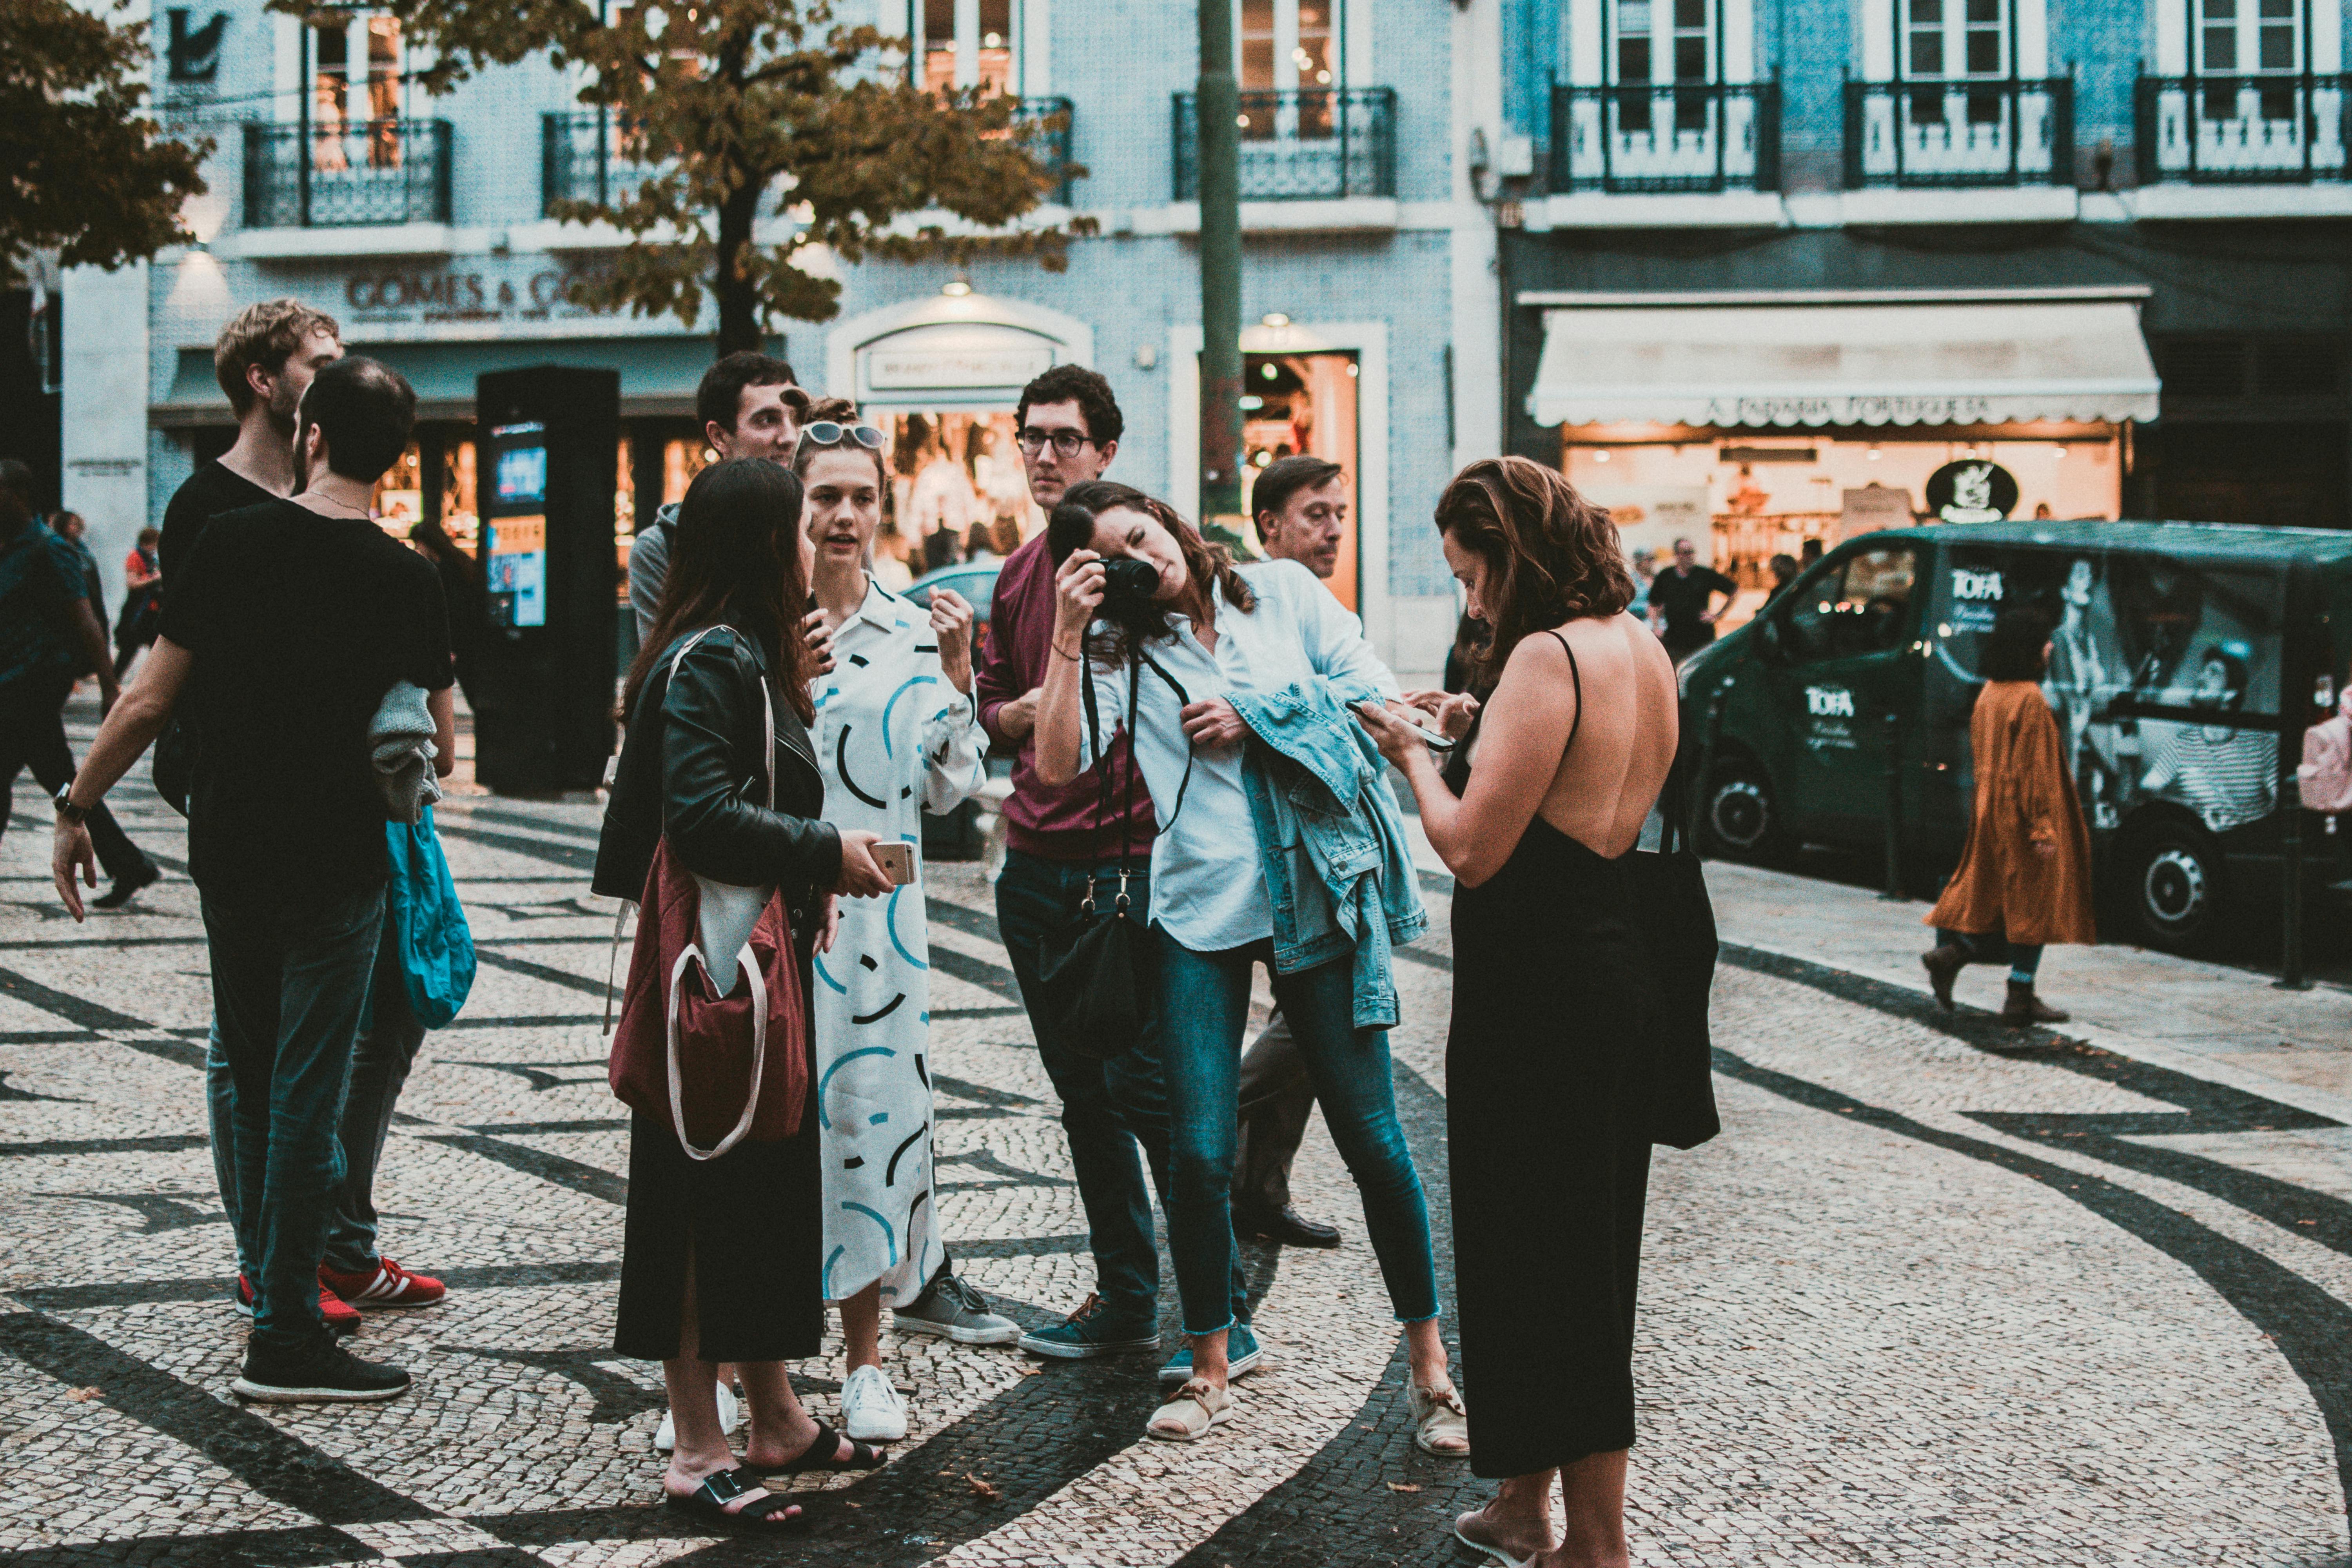 Group of people standing outdoors. | Photo: Pexels